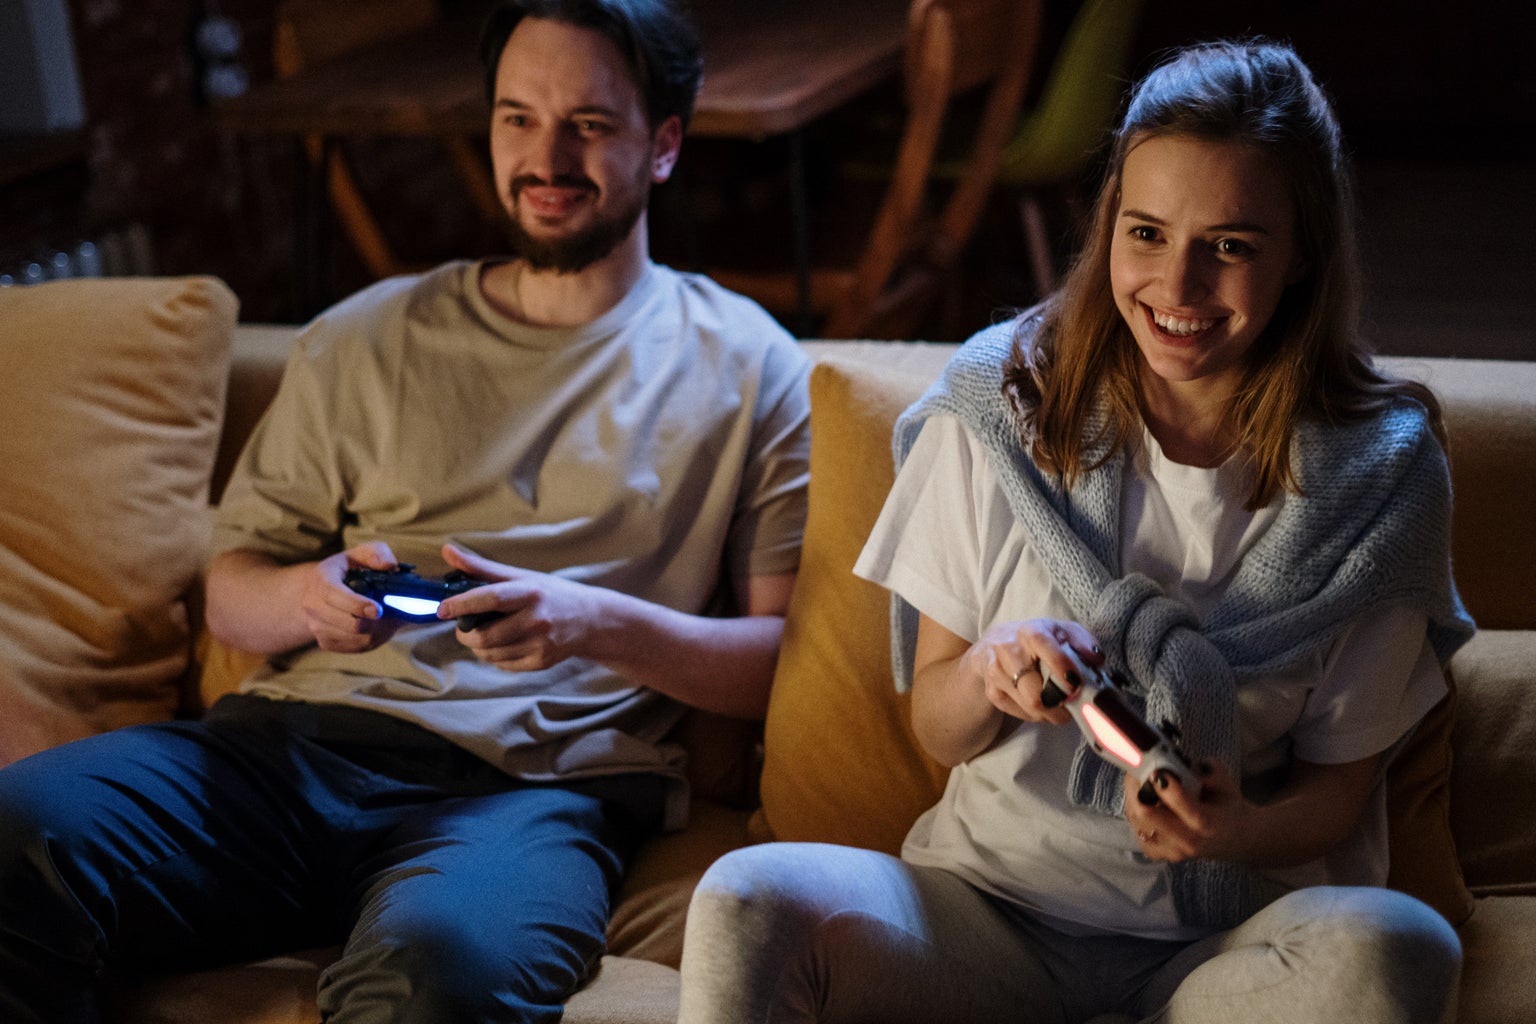 A girl and a guy sitting on a couch and smiling with video game controllers in their hands.